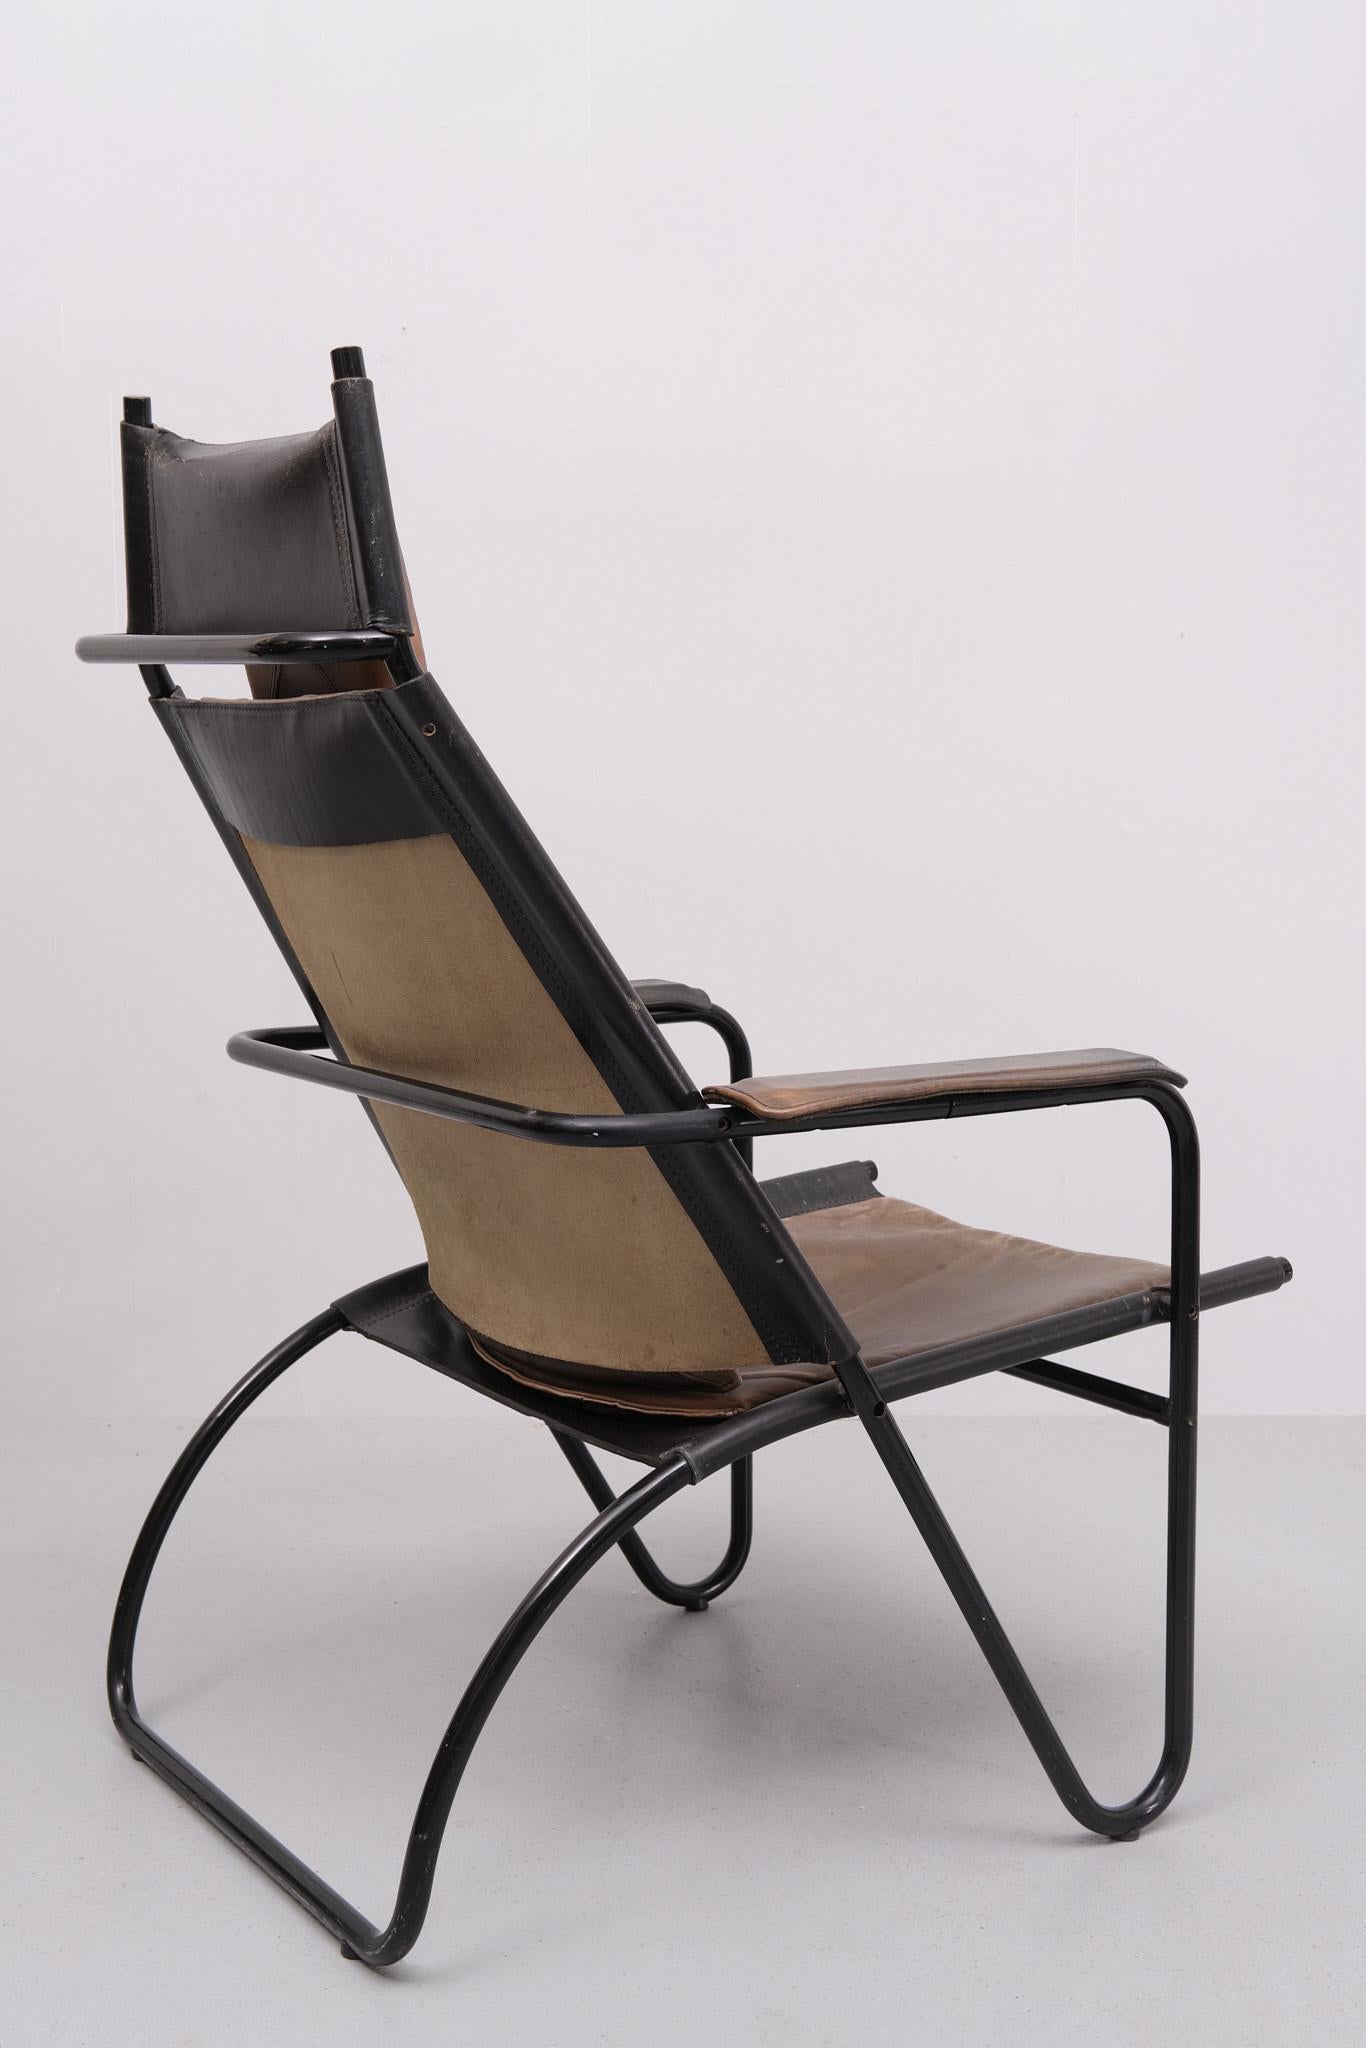 attrib Lina Bo Bardi Leather lounge chair Brazil  In Good Condition For Sale In Den Haag, NL